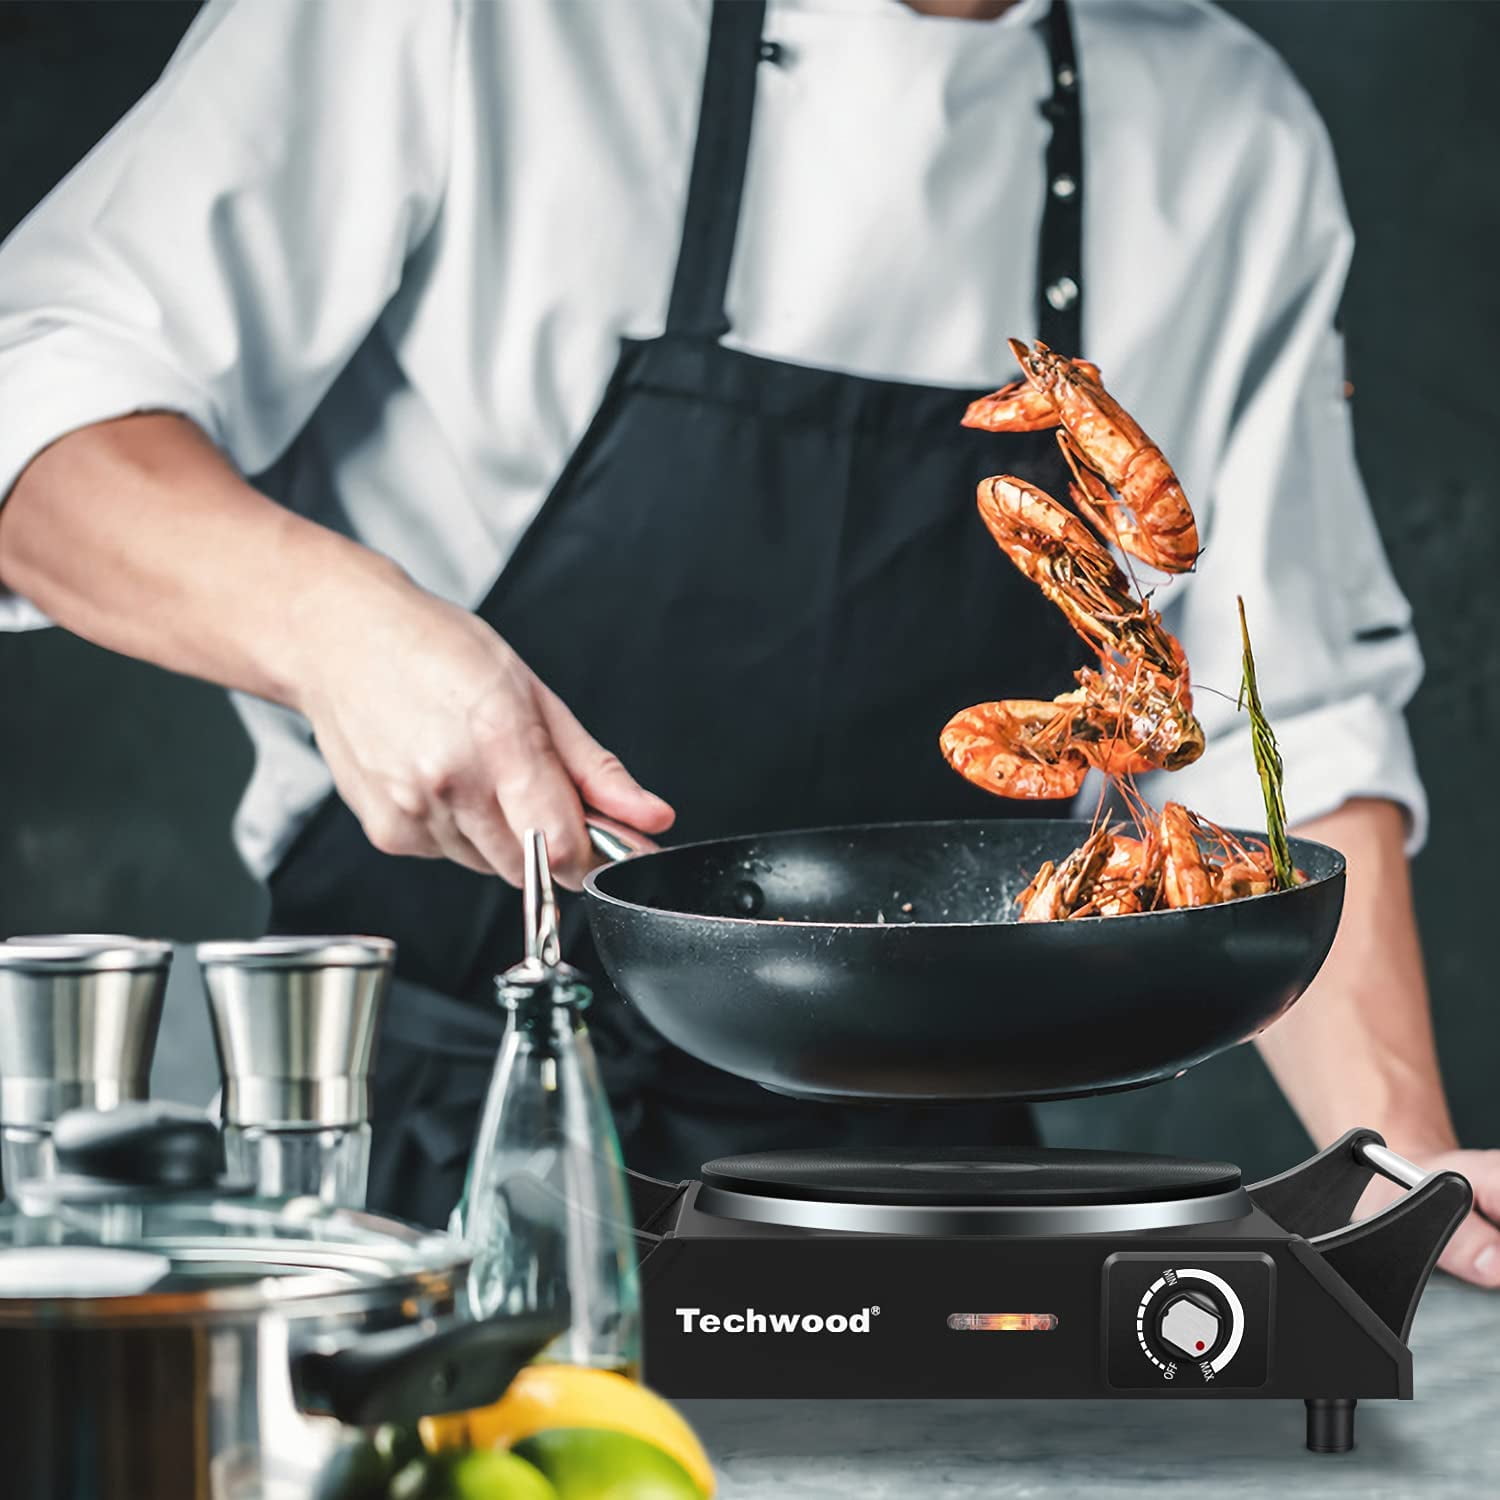 Kaersidun Hot Plate Electric Single Burner 1500W Portable Burner for Cooking with Adjustable Temperature & Stay Cool Handles Stainless Steel Easy